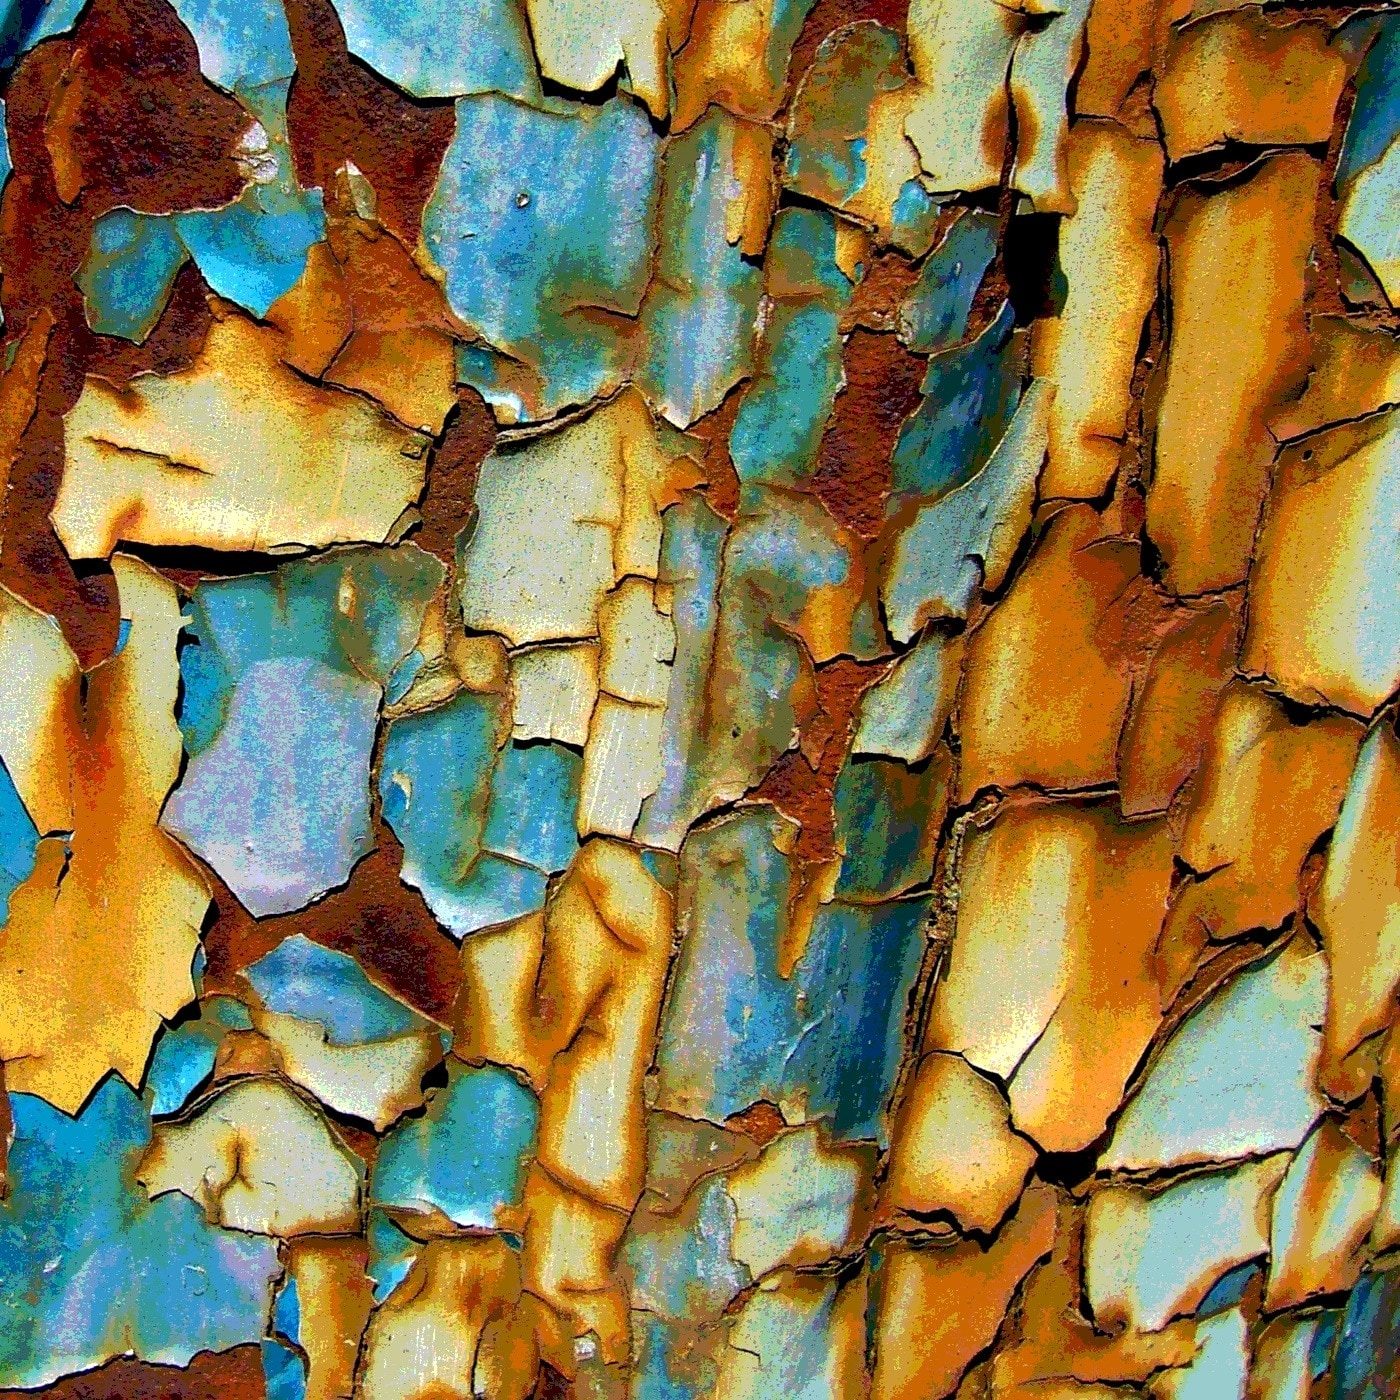 rust-old-paint-weathered-rusty-backgrounds-full-frame-free-image